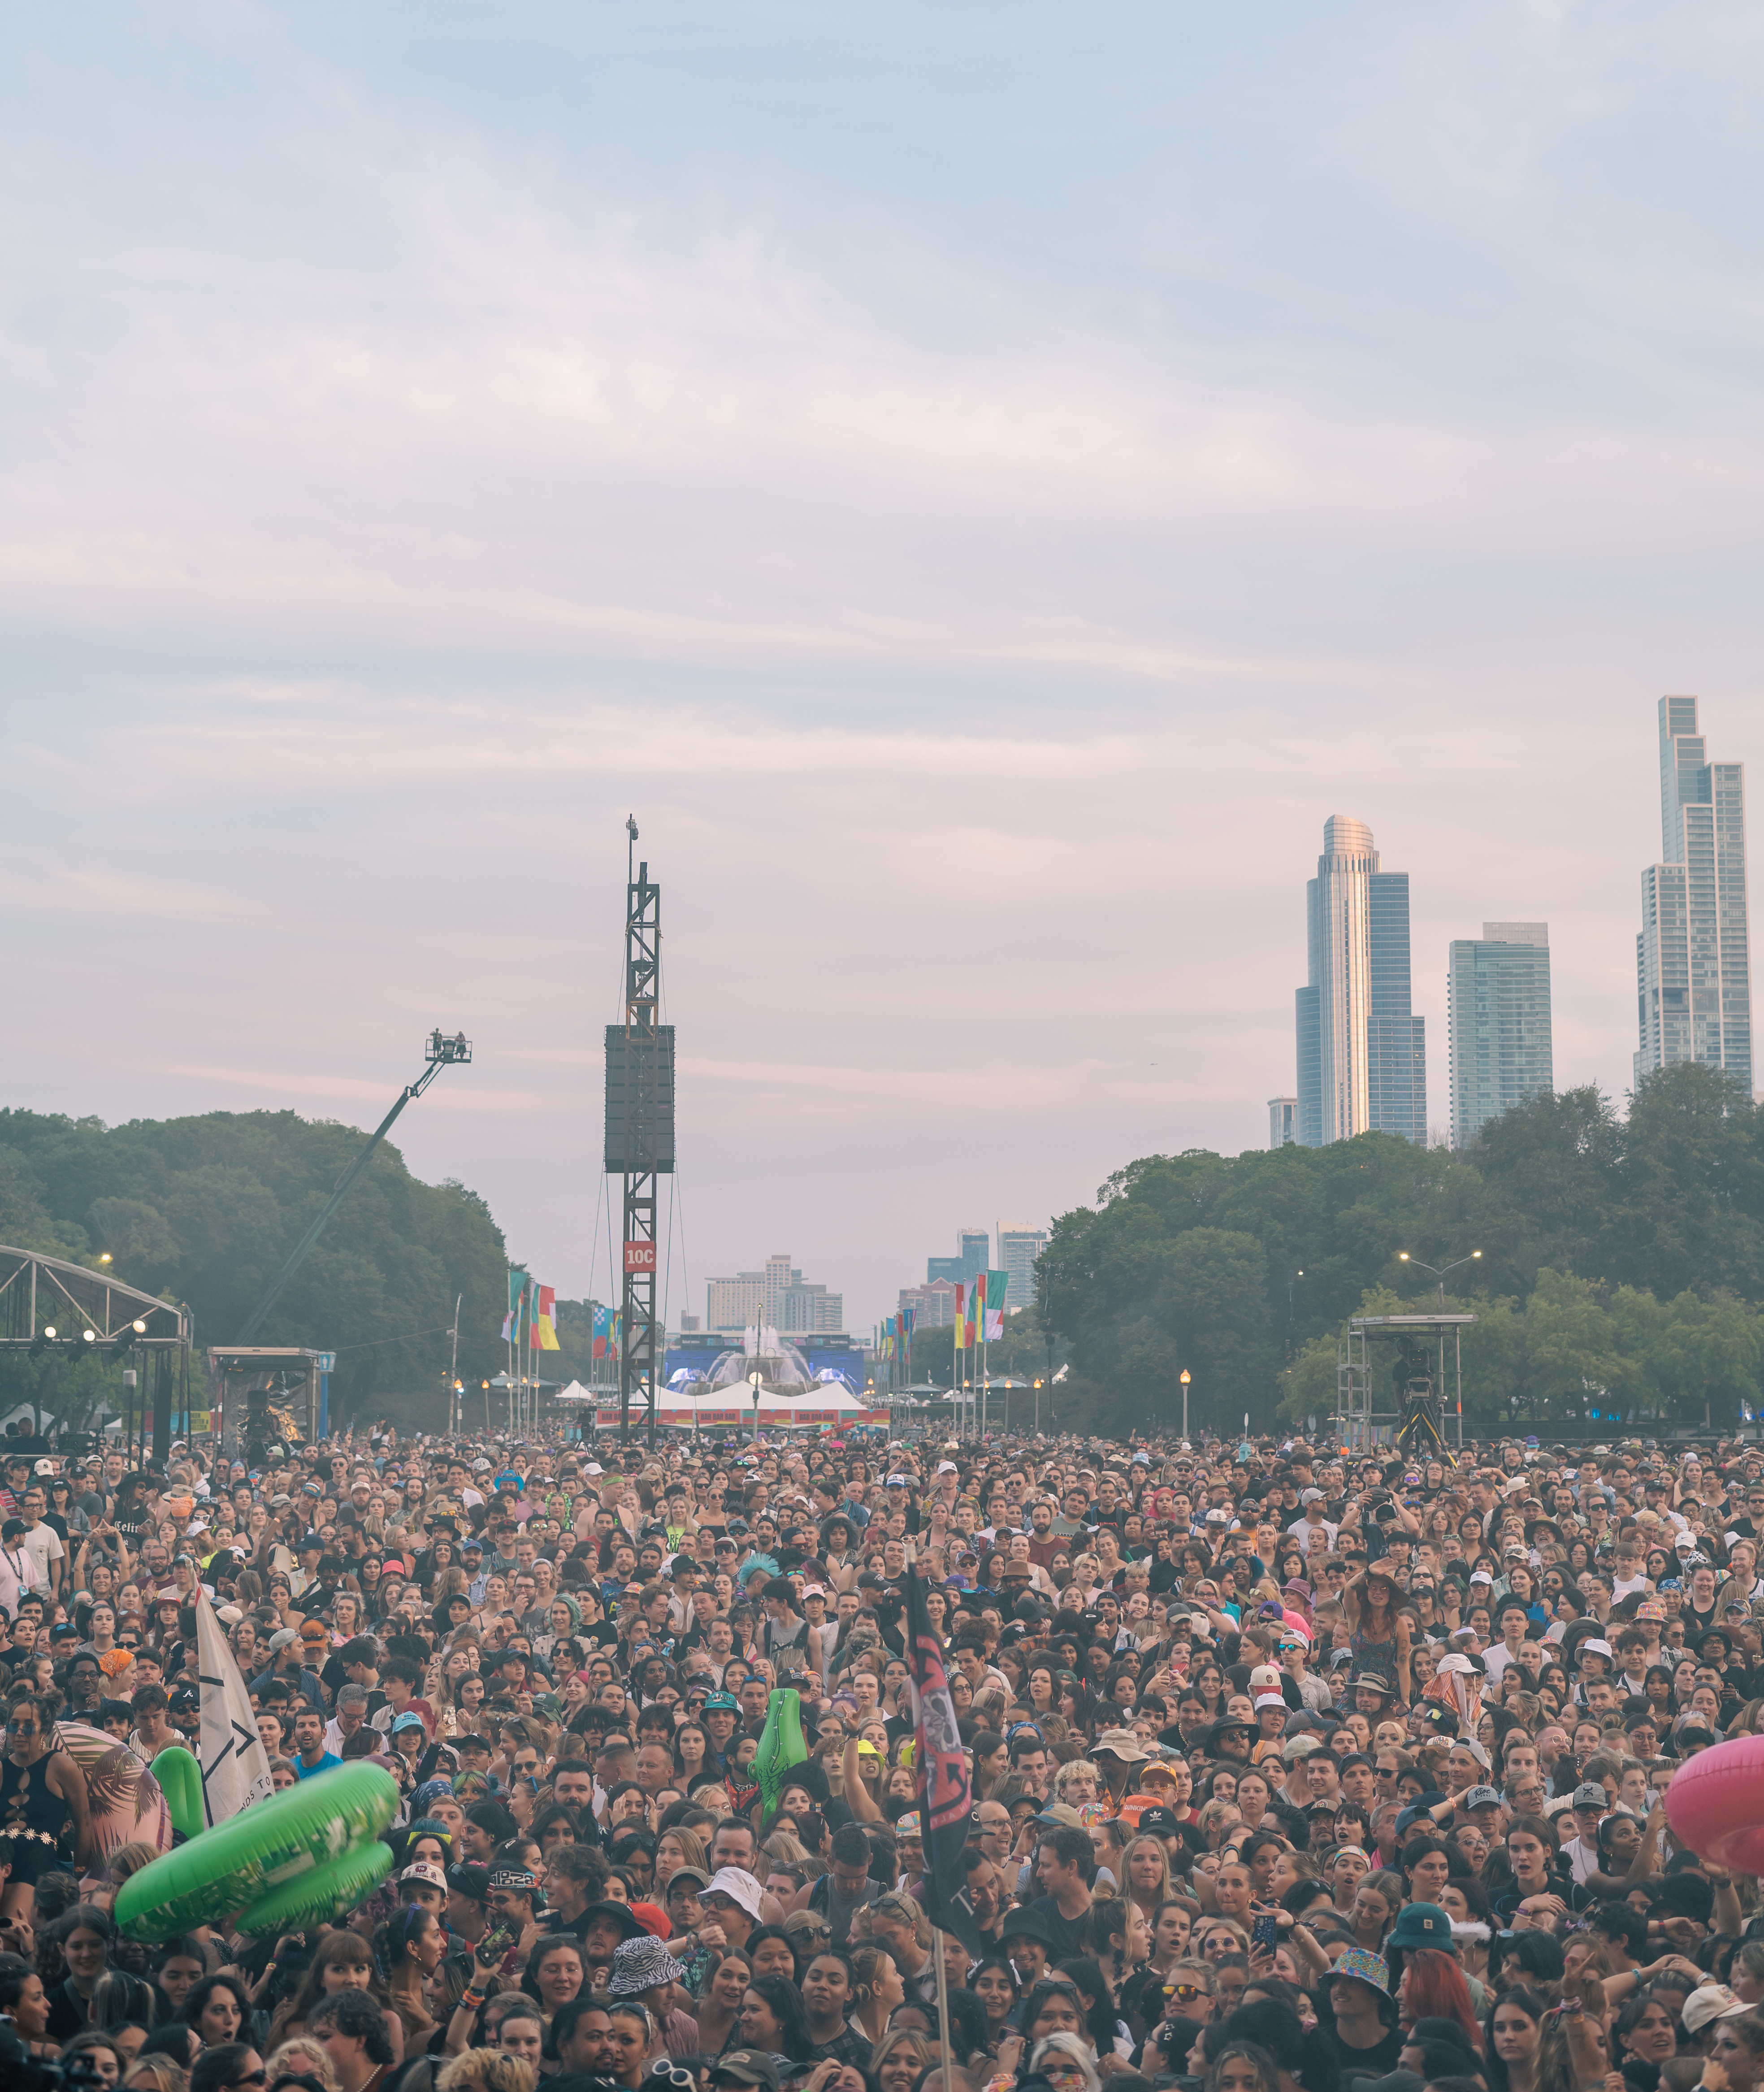 In The Loop Magazine Lolla Highlights: The First Two Days Of Lollapalooza  2023 Chicago - In The Loop Magazine